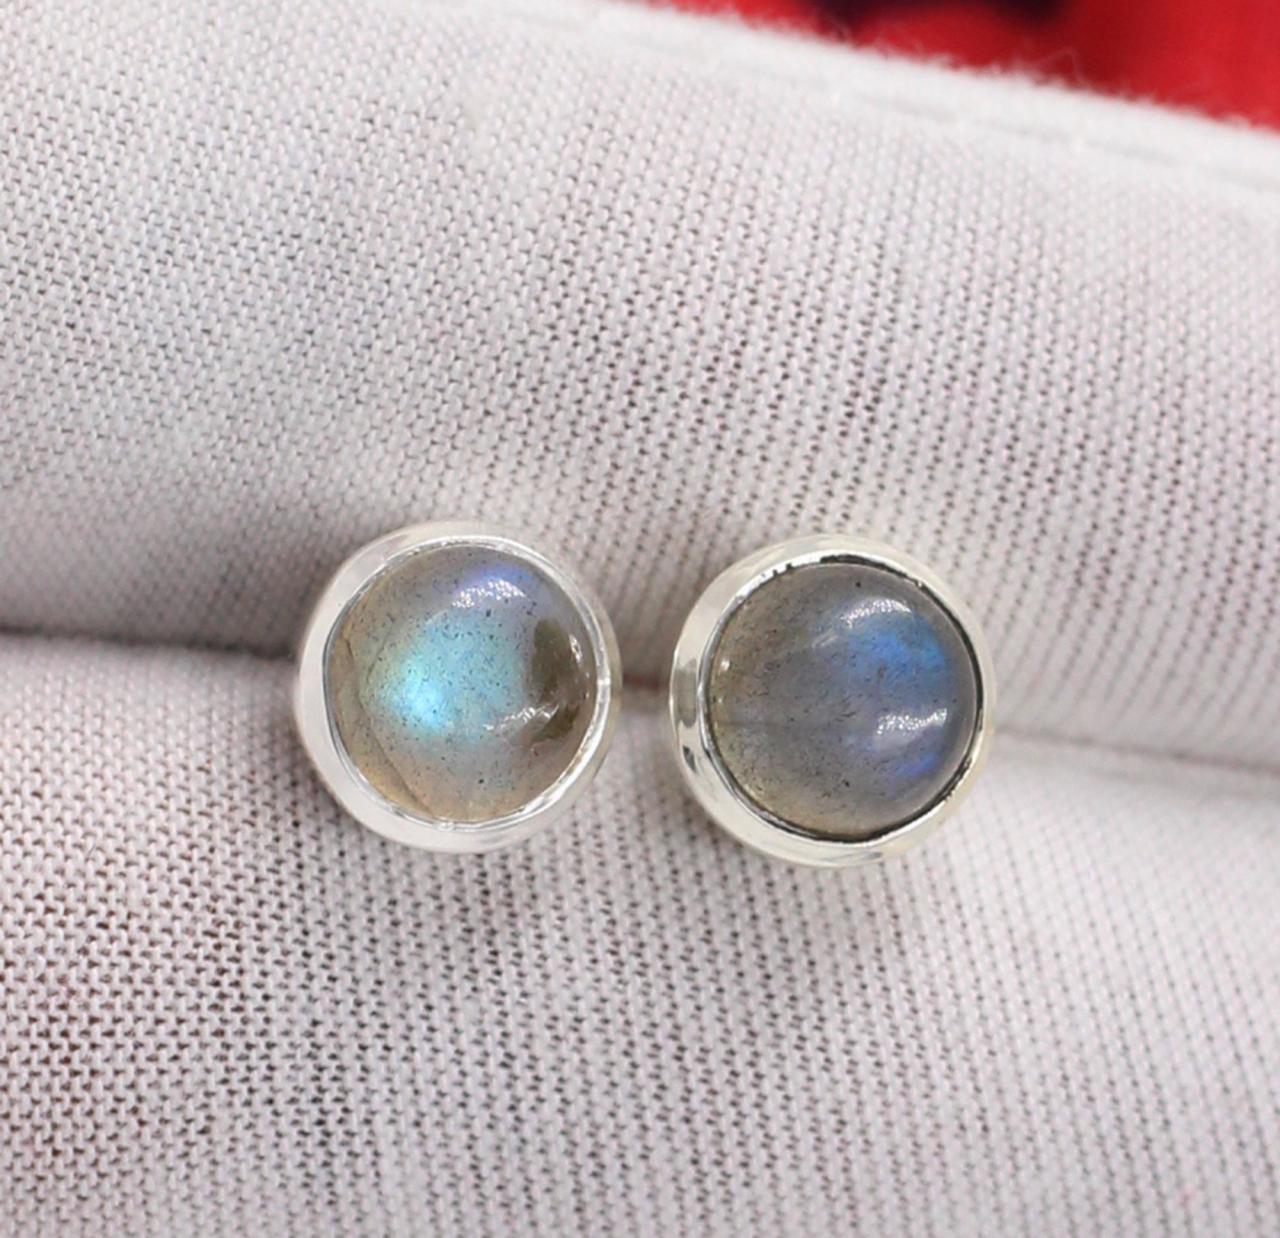 Labradorite Pair Gemstone Stud Post 8mm Round Earring Solid 925 Sterling Silver Jewelry,girls Gift Valentine's Day Post Earring Eter249